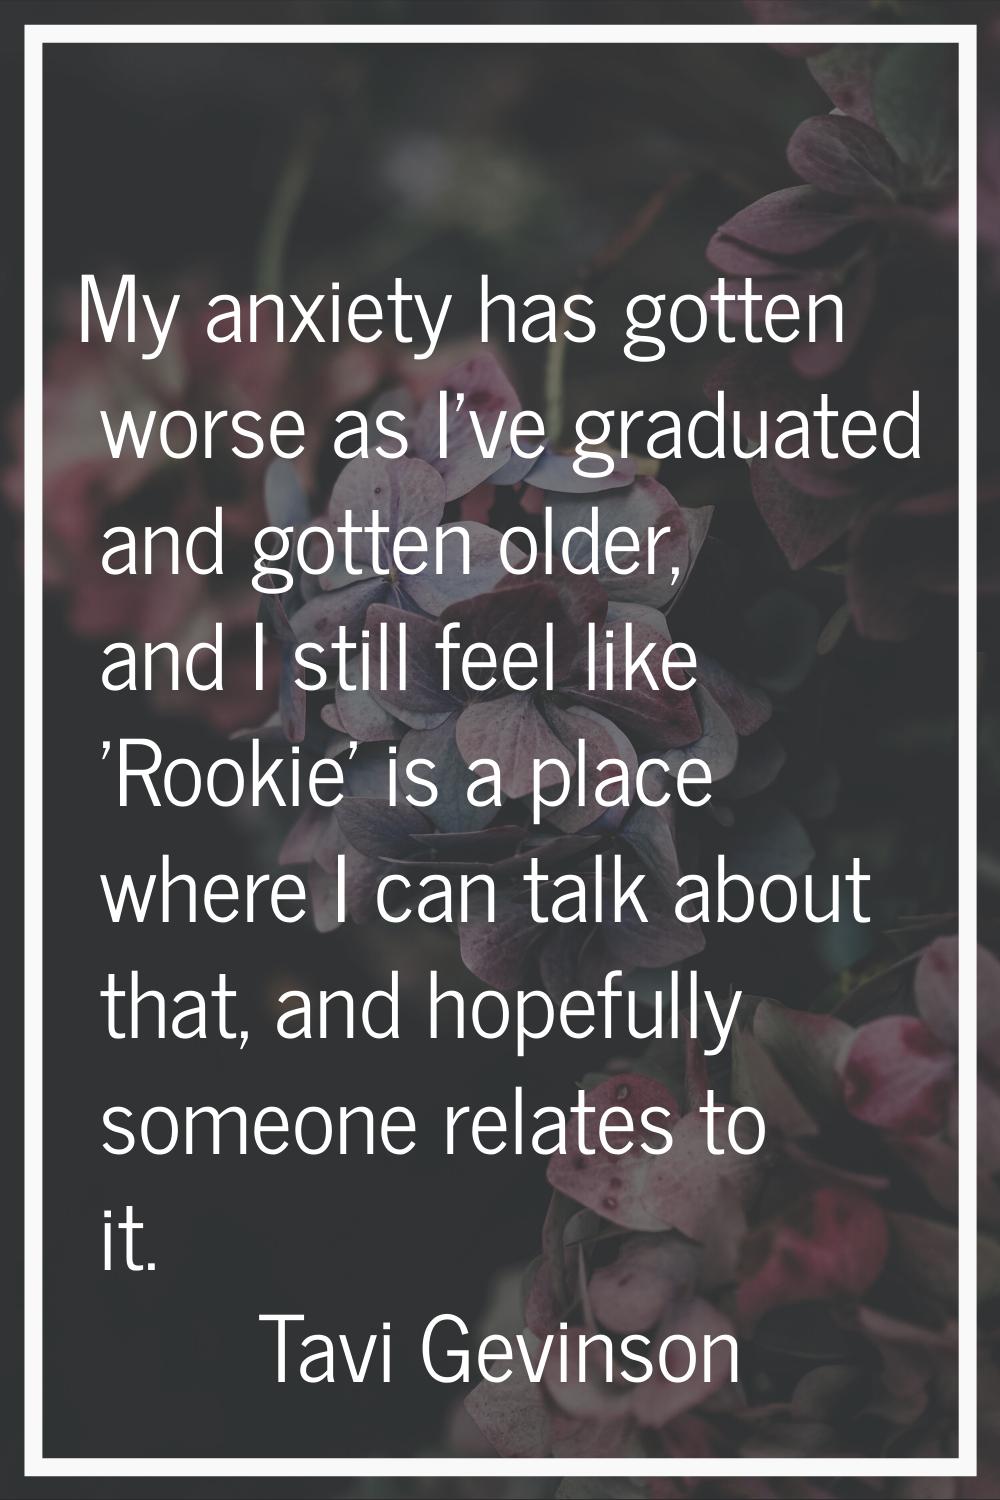 My anxiety has gotten worse as I've graduated and gotten older, and I still feel like 'Rookie' is a